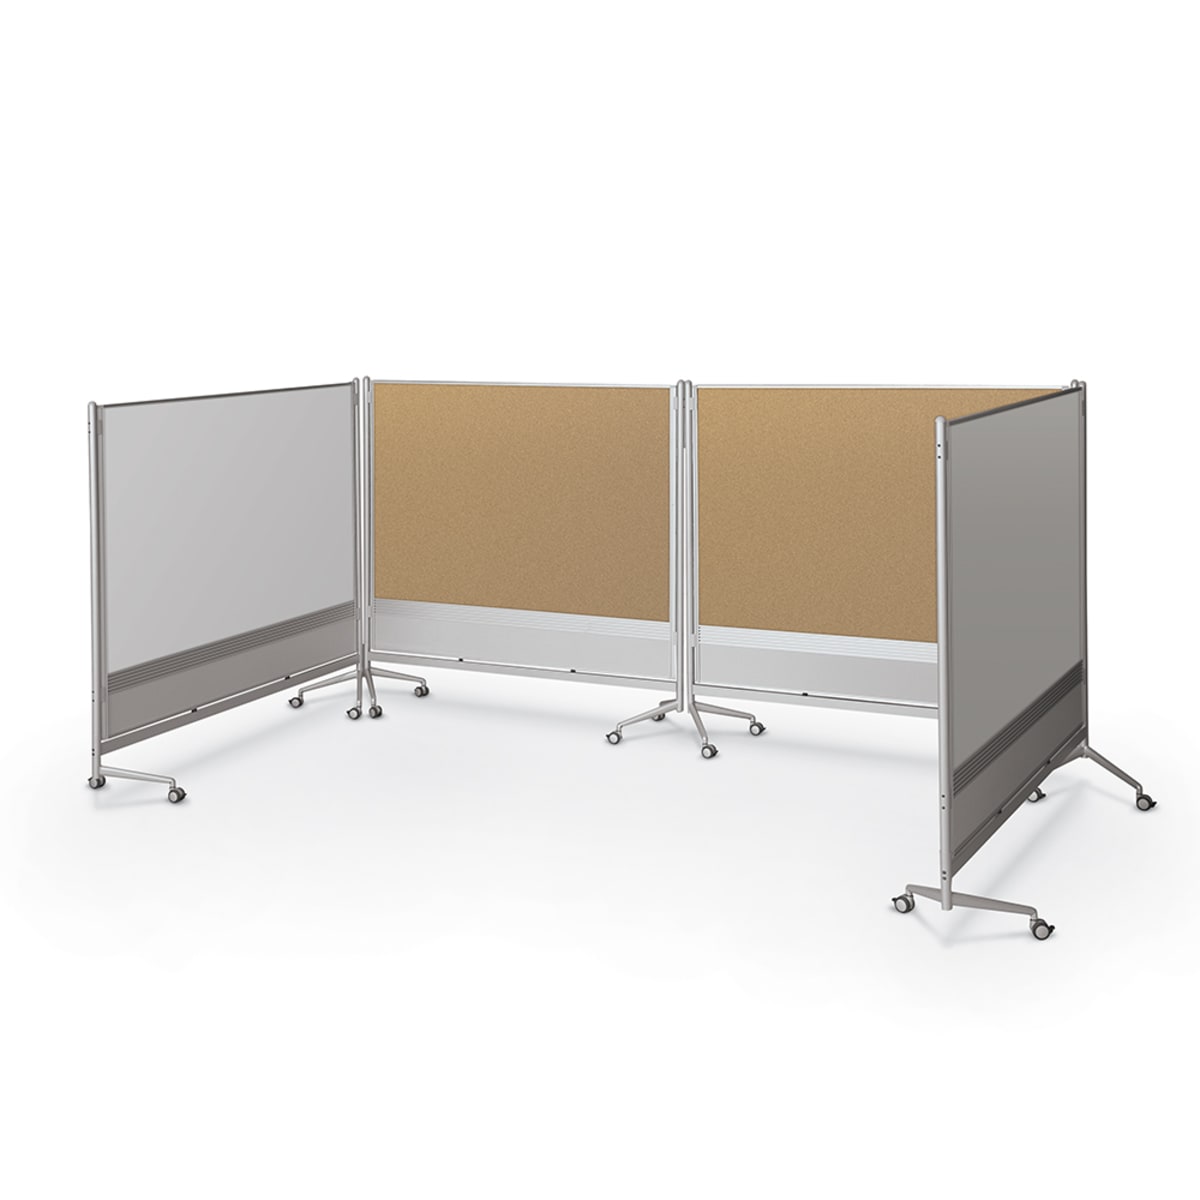 Mooreco Mobile Room Divider & Display Panel Dura-Rite - Both Sides - 6'H x 8'W (Mooreco 661AH-HH) - SchoolOutlet